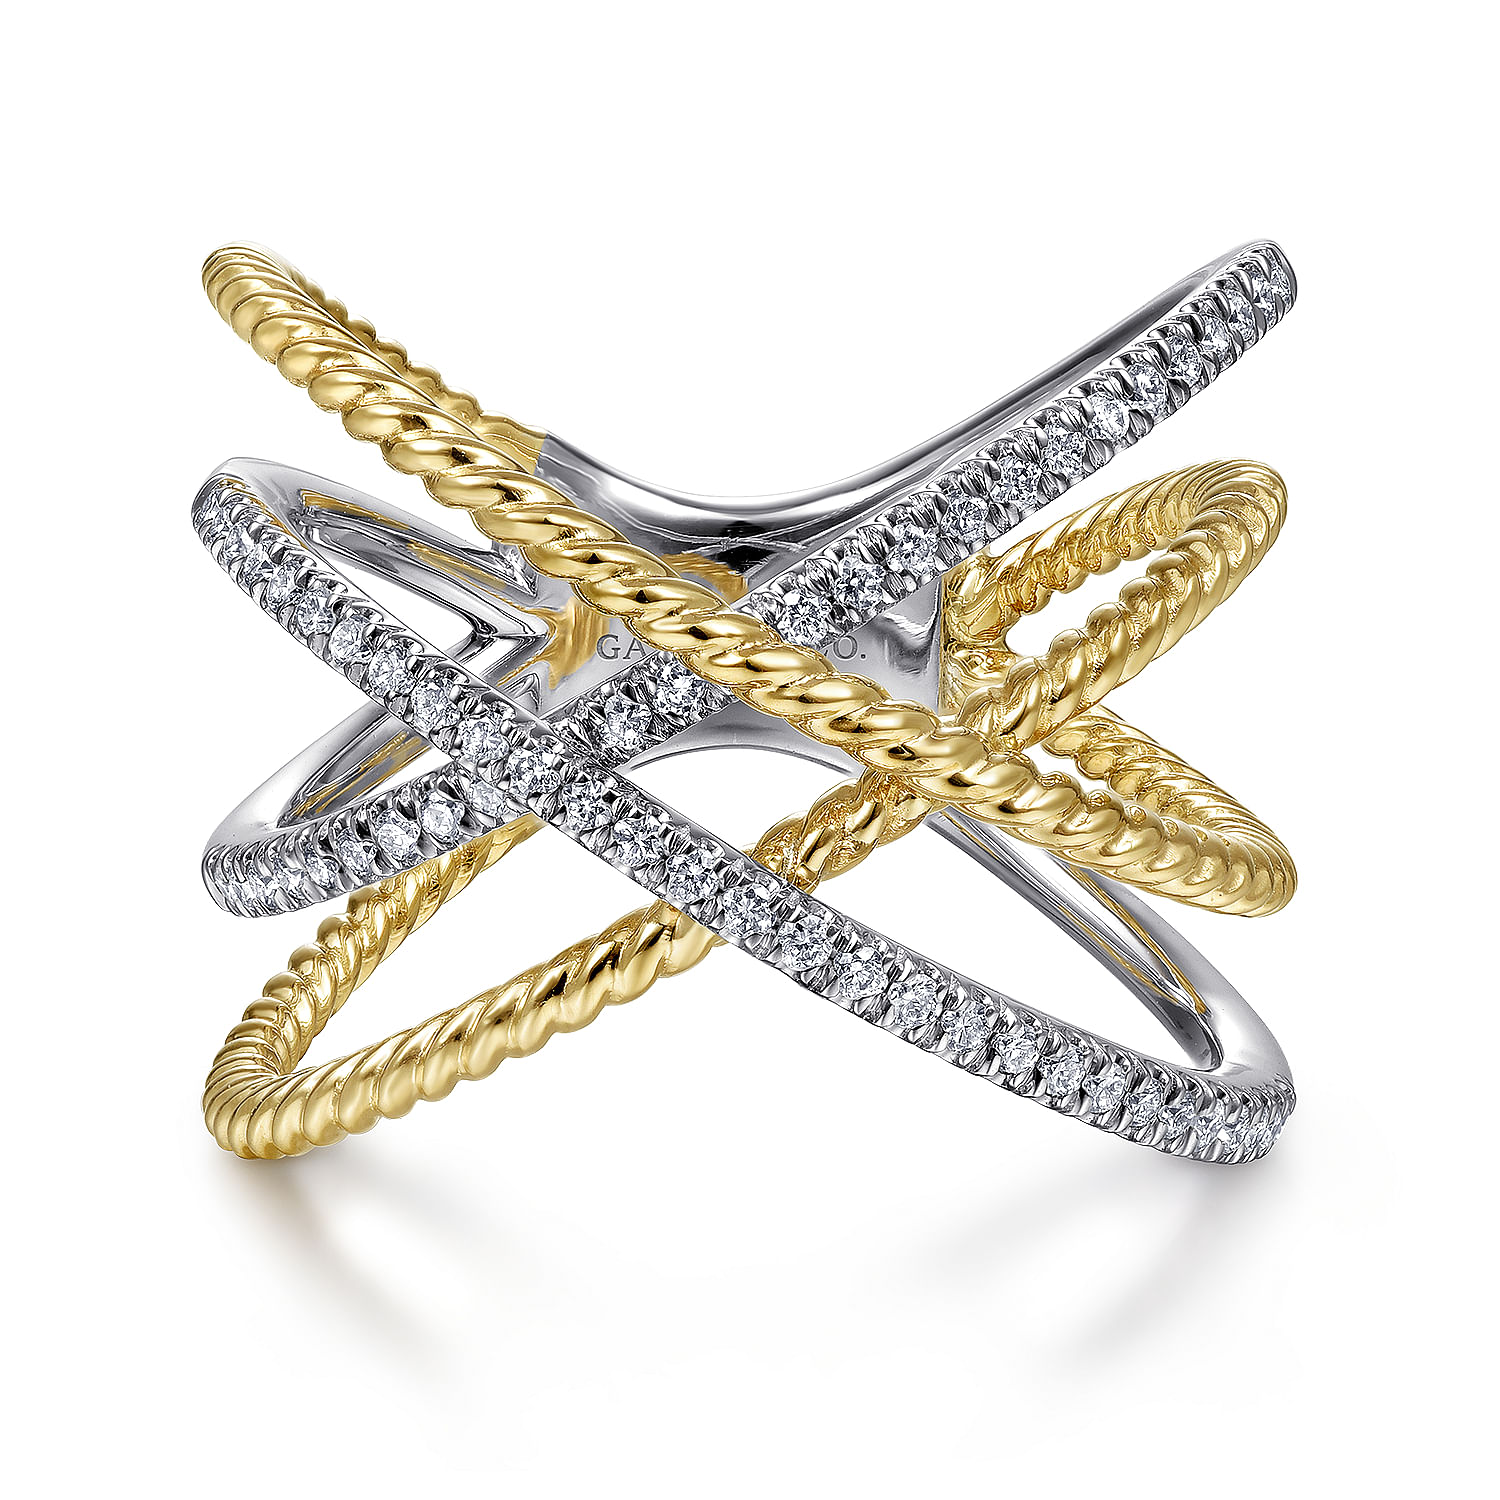 Gabriel - 14K White-Yellow Gold Twisted Rope and Diamond Criss Cross Ring